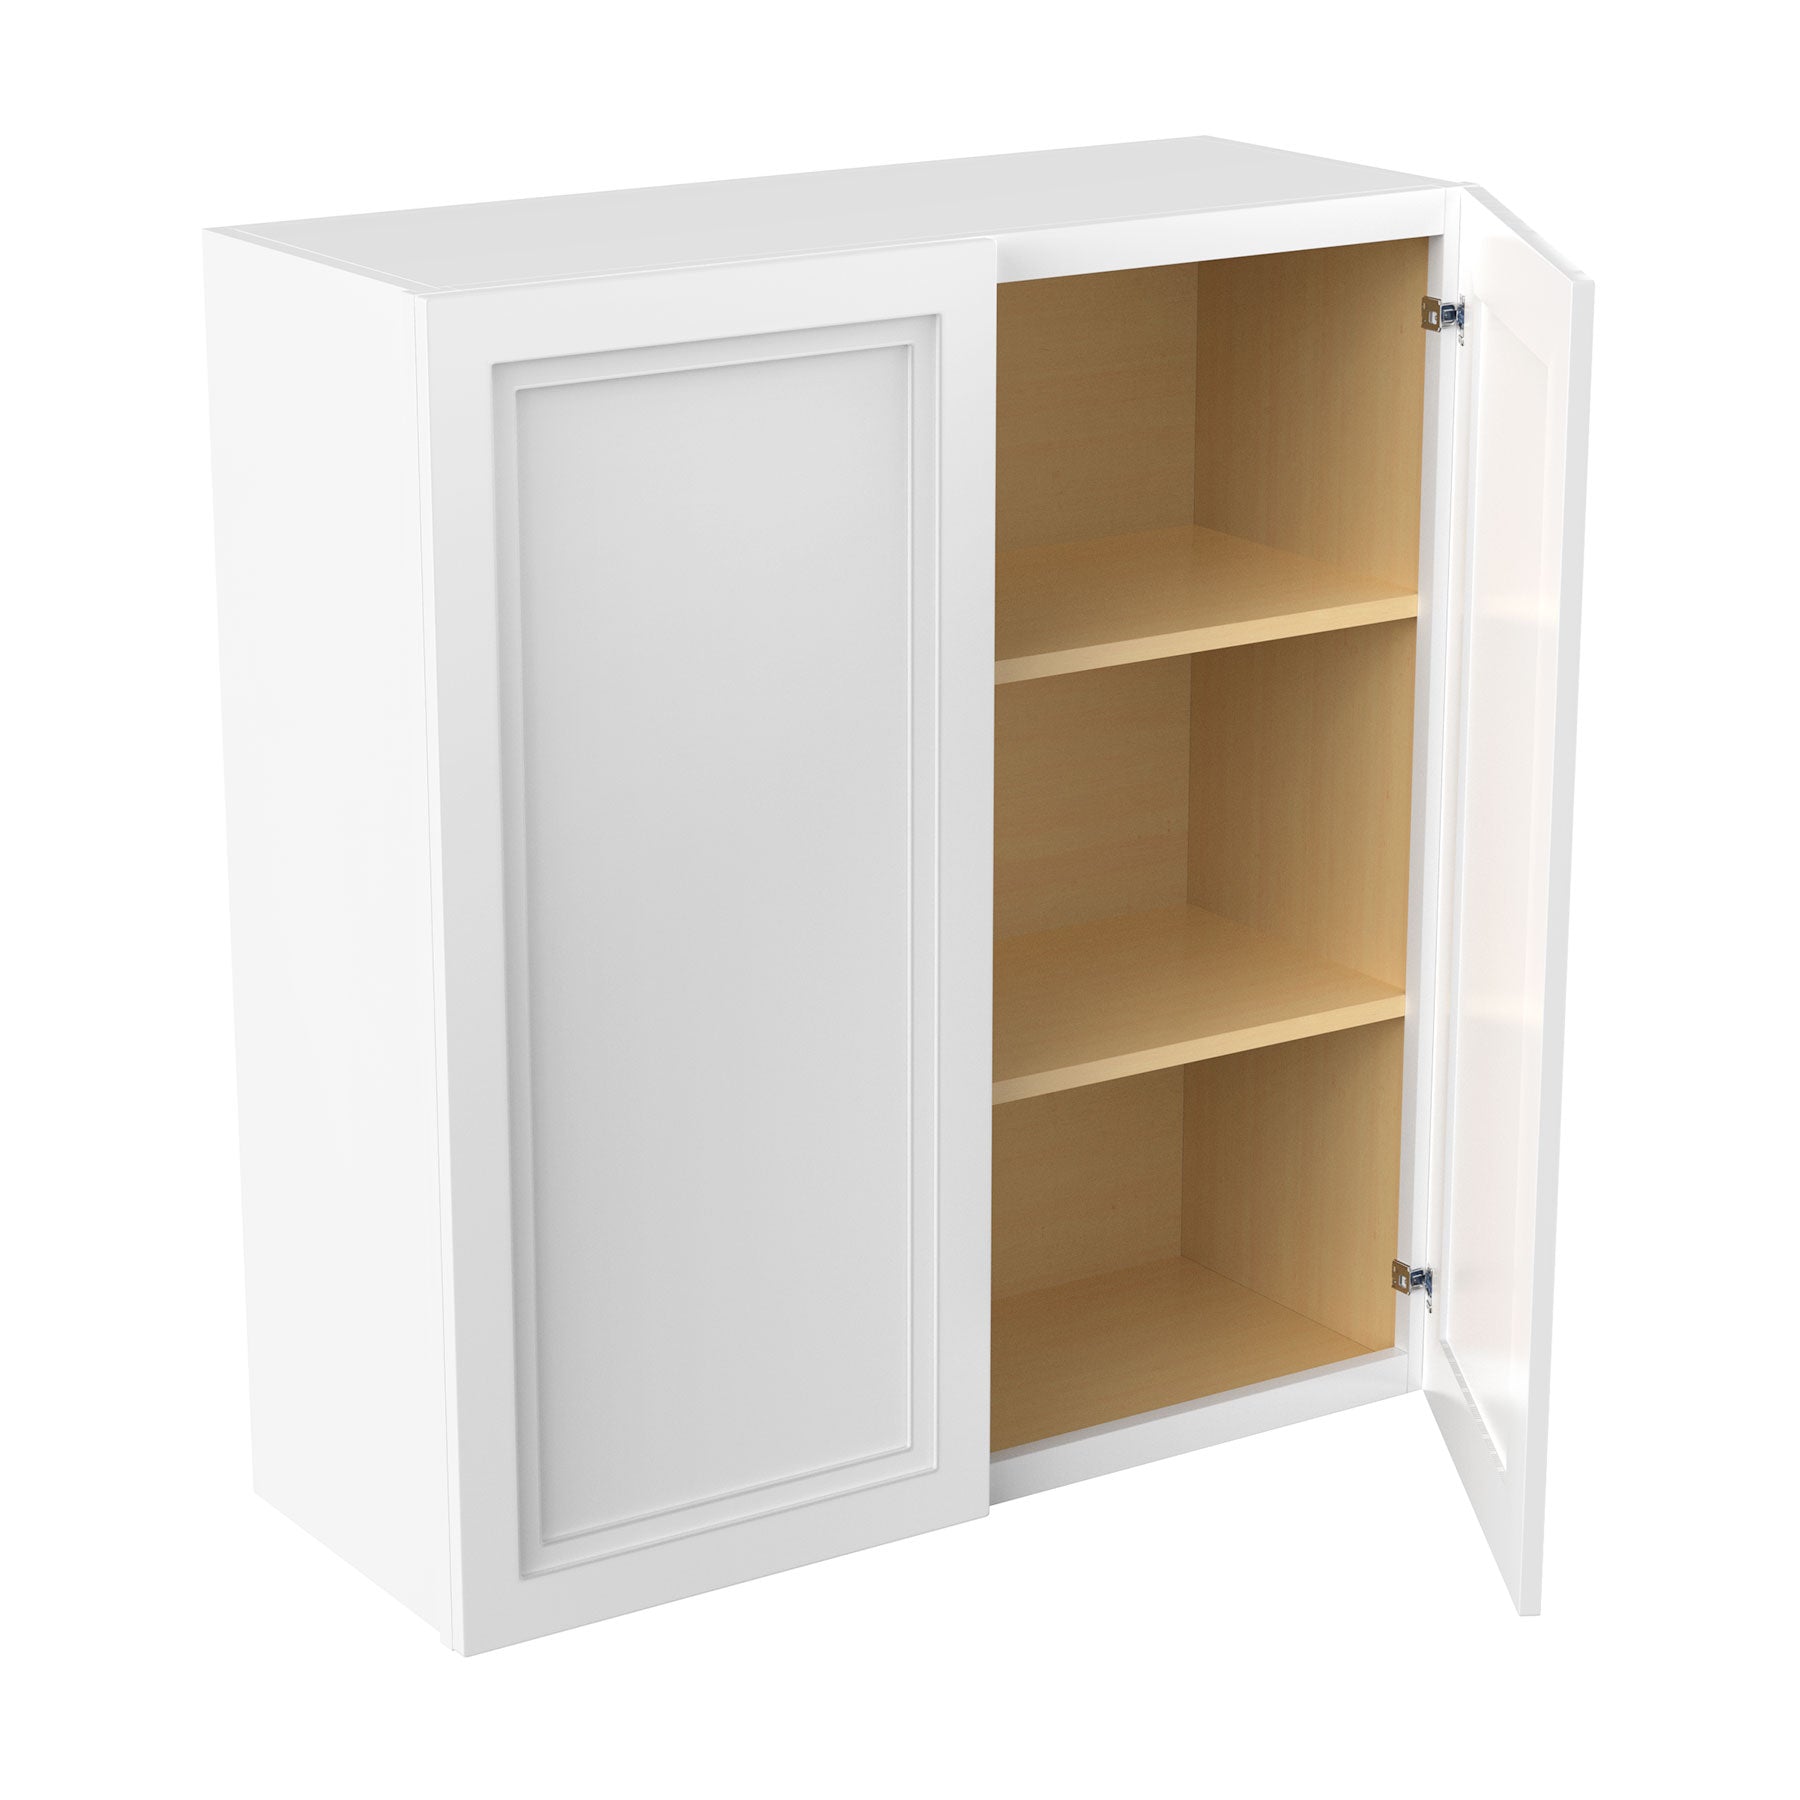 RTA - Fashion White - 36" High Double Door Wall Cabinet | 33"W x 36"H x 12"D